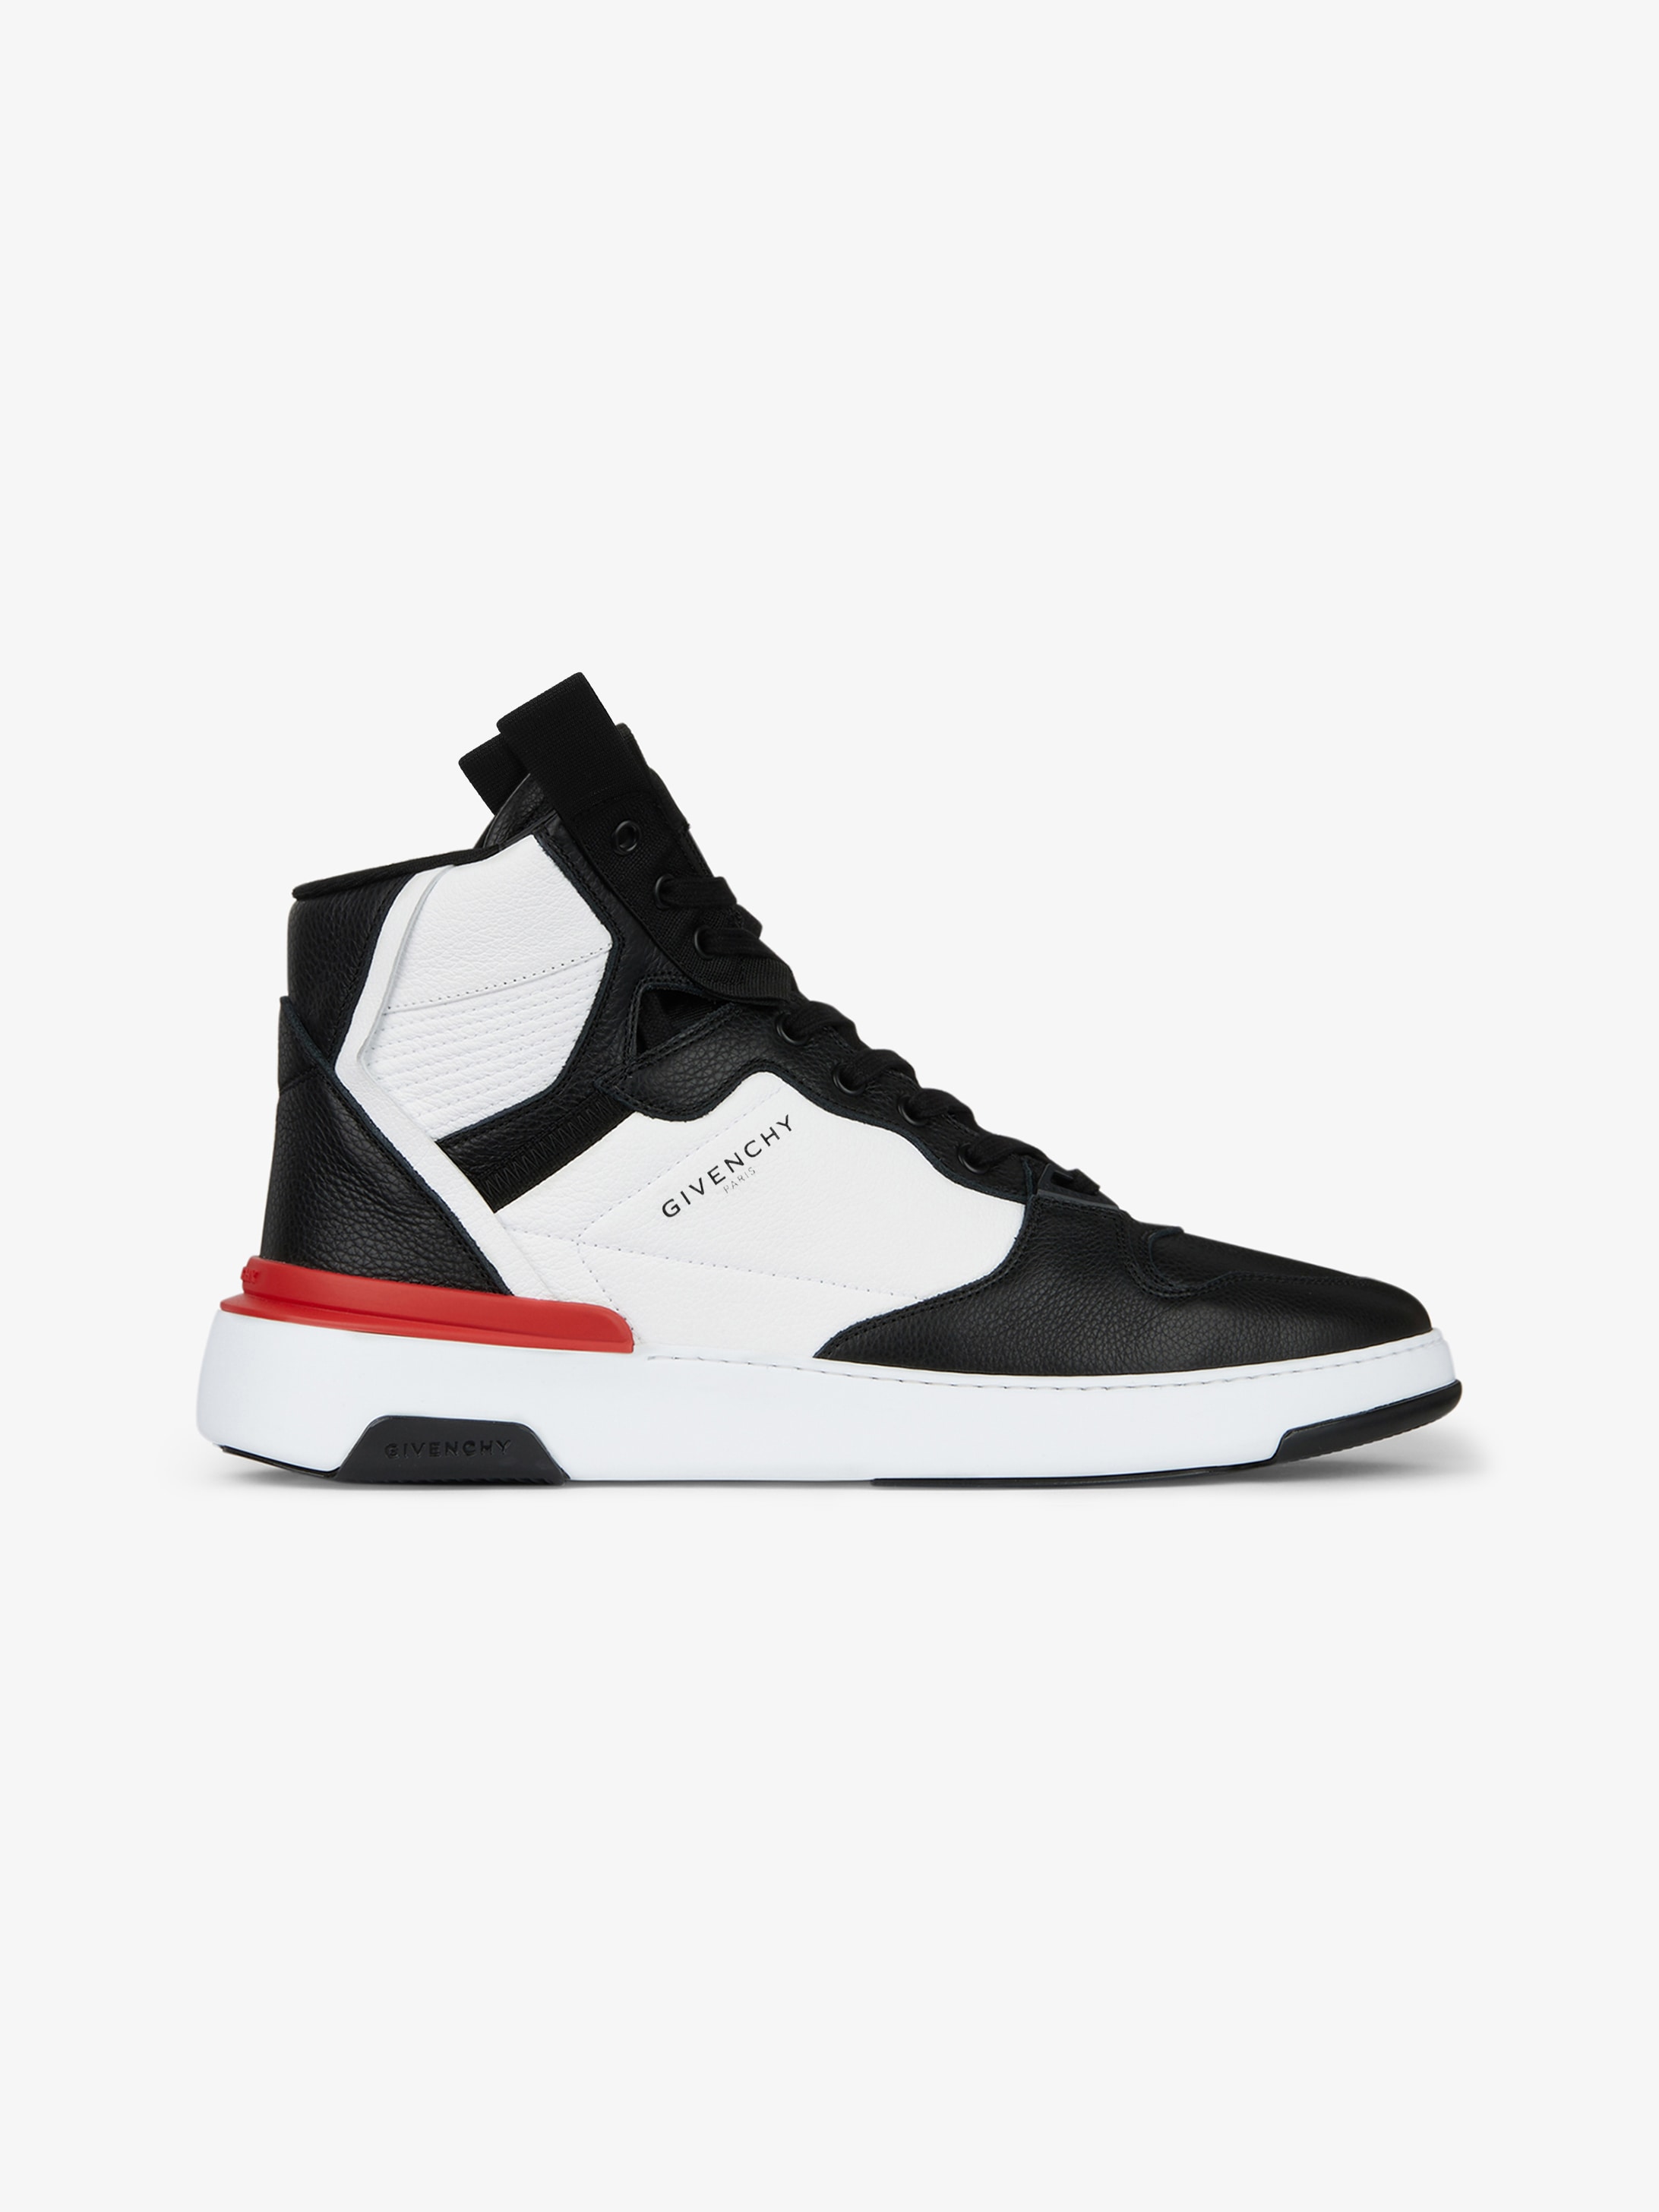 Two-toned WING high-top sneakers in 